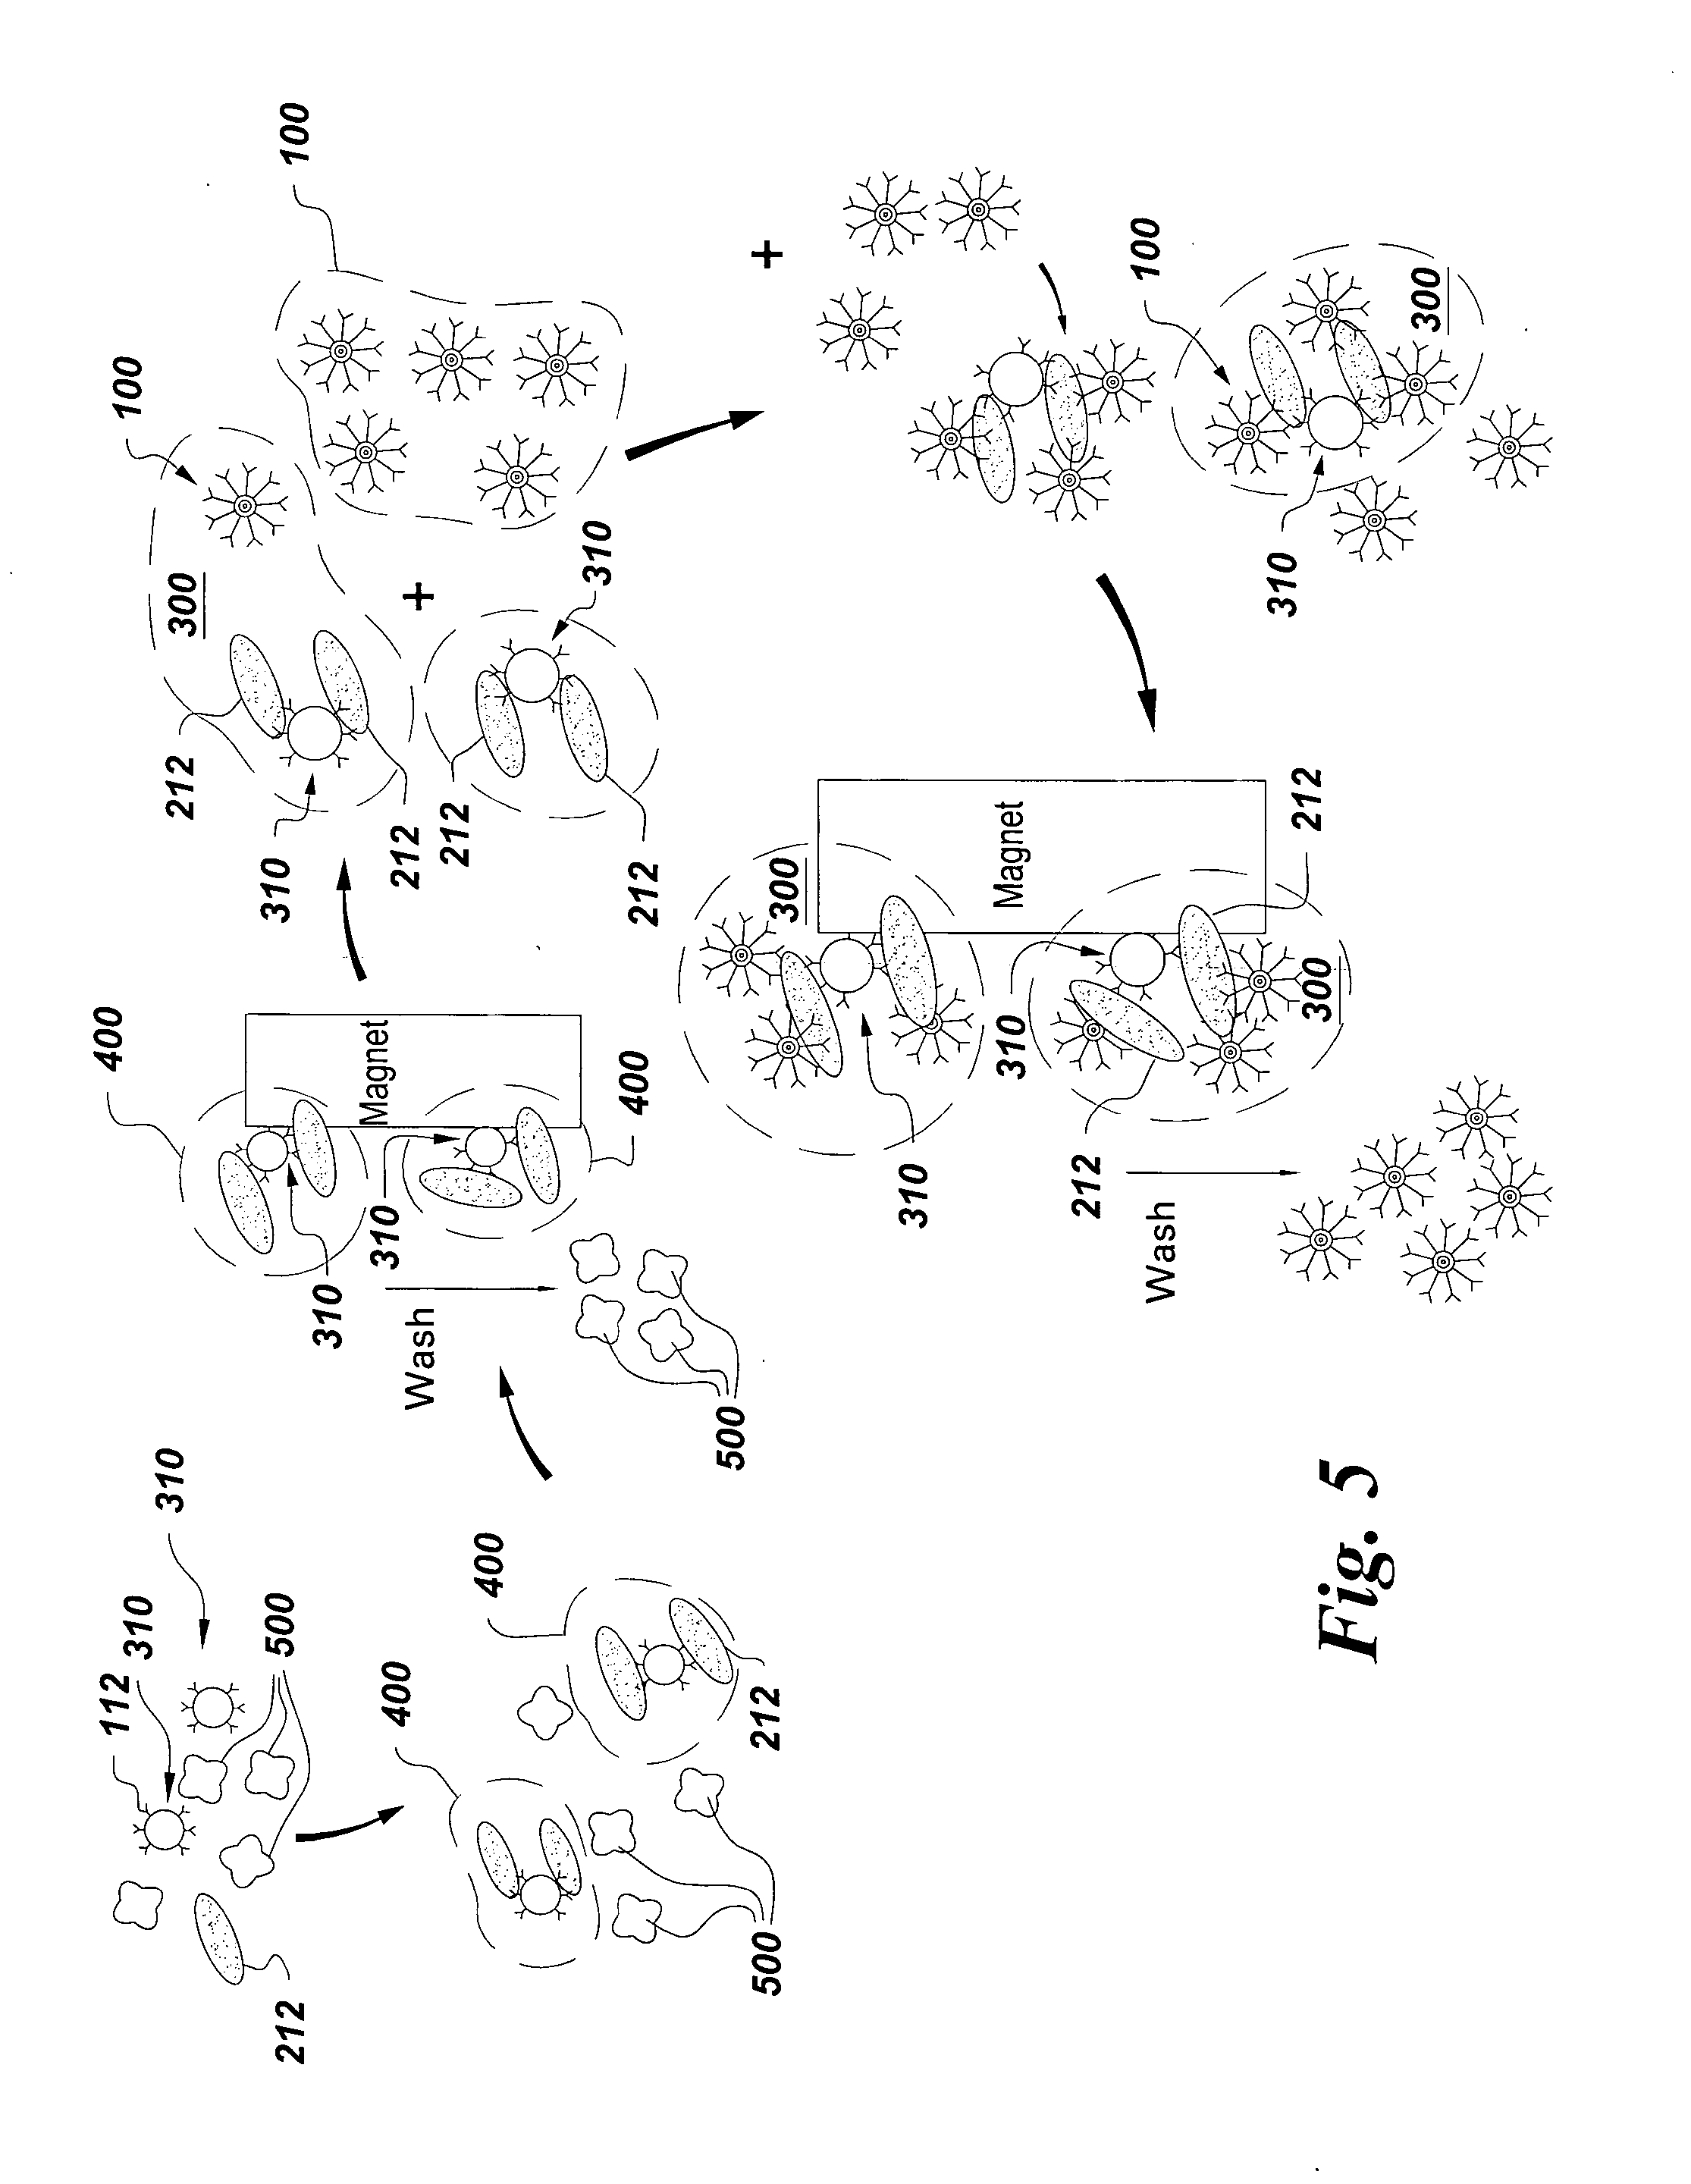 Method of separating unattached Raman-active tag from bioassay or other reaction mixture